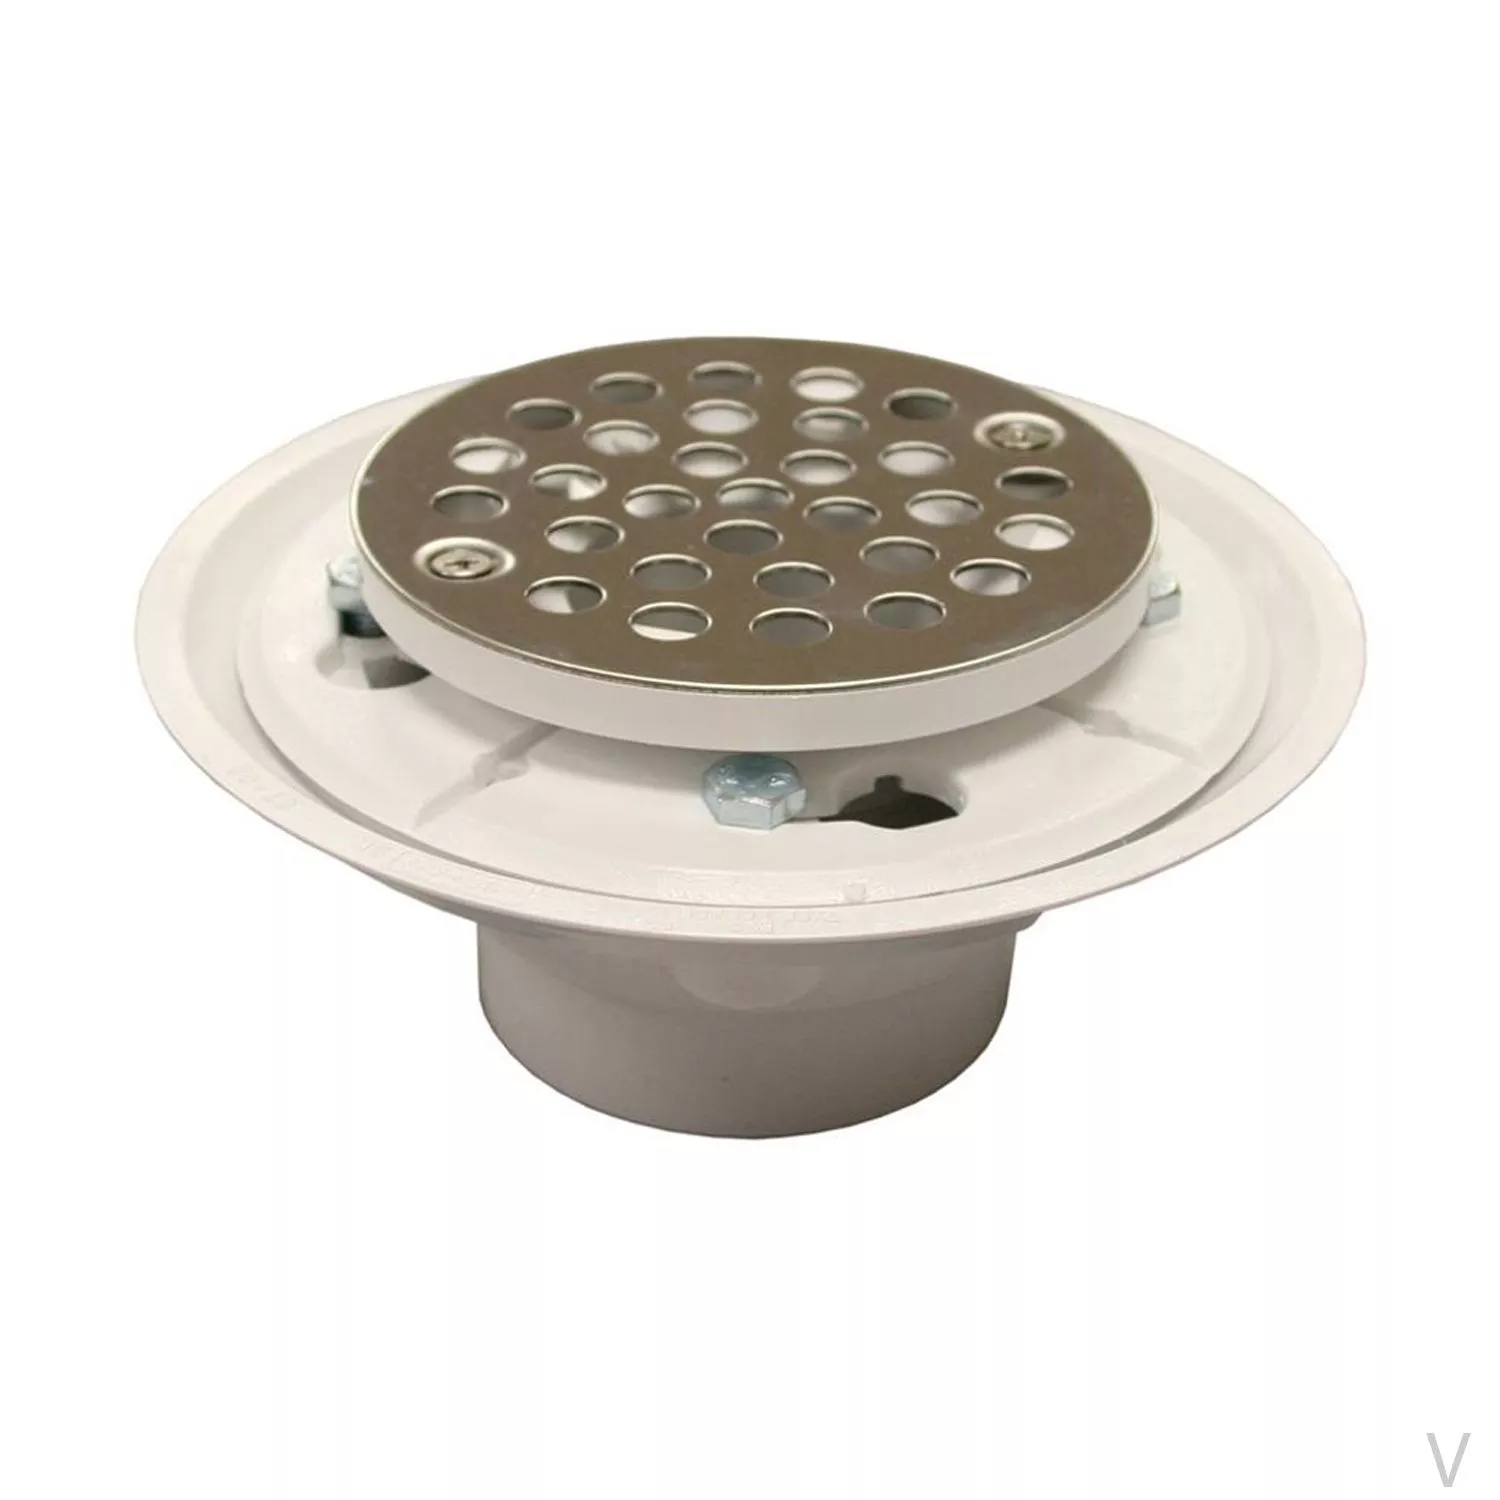 Decorative Shower Drain Covers - California Faucets